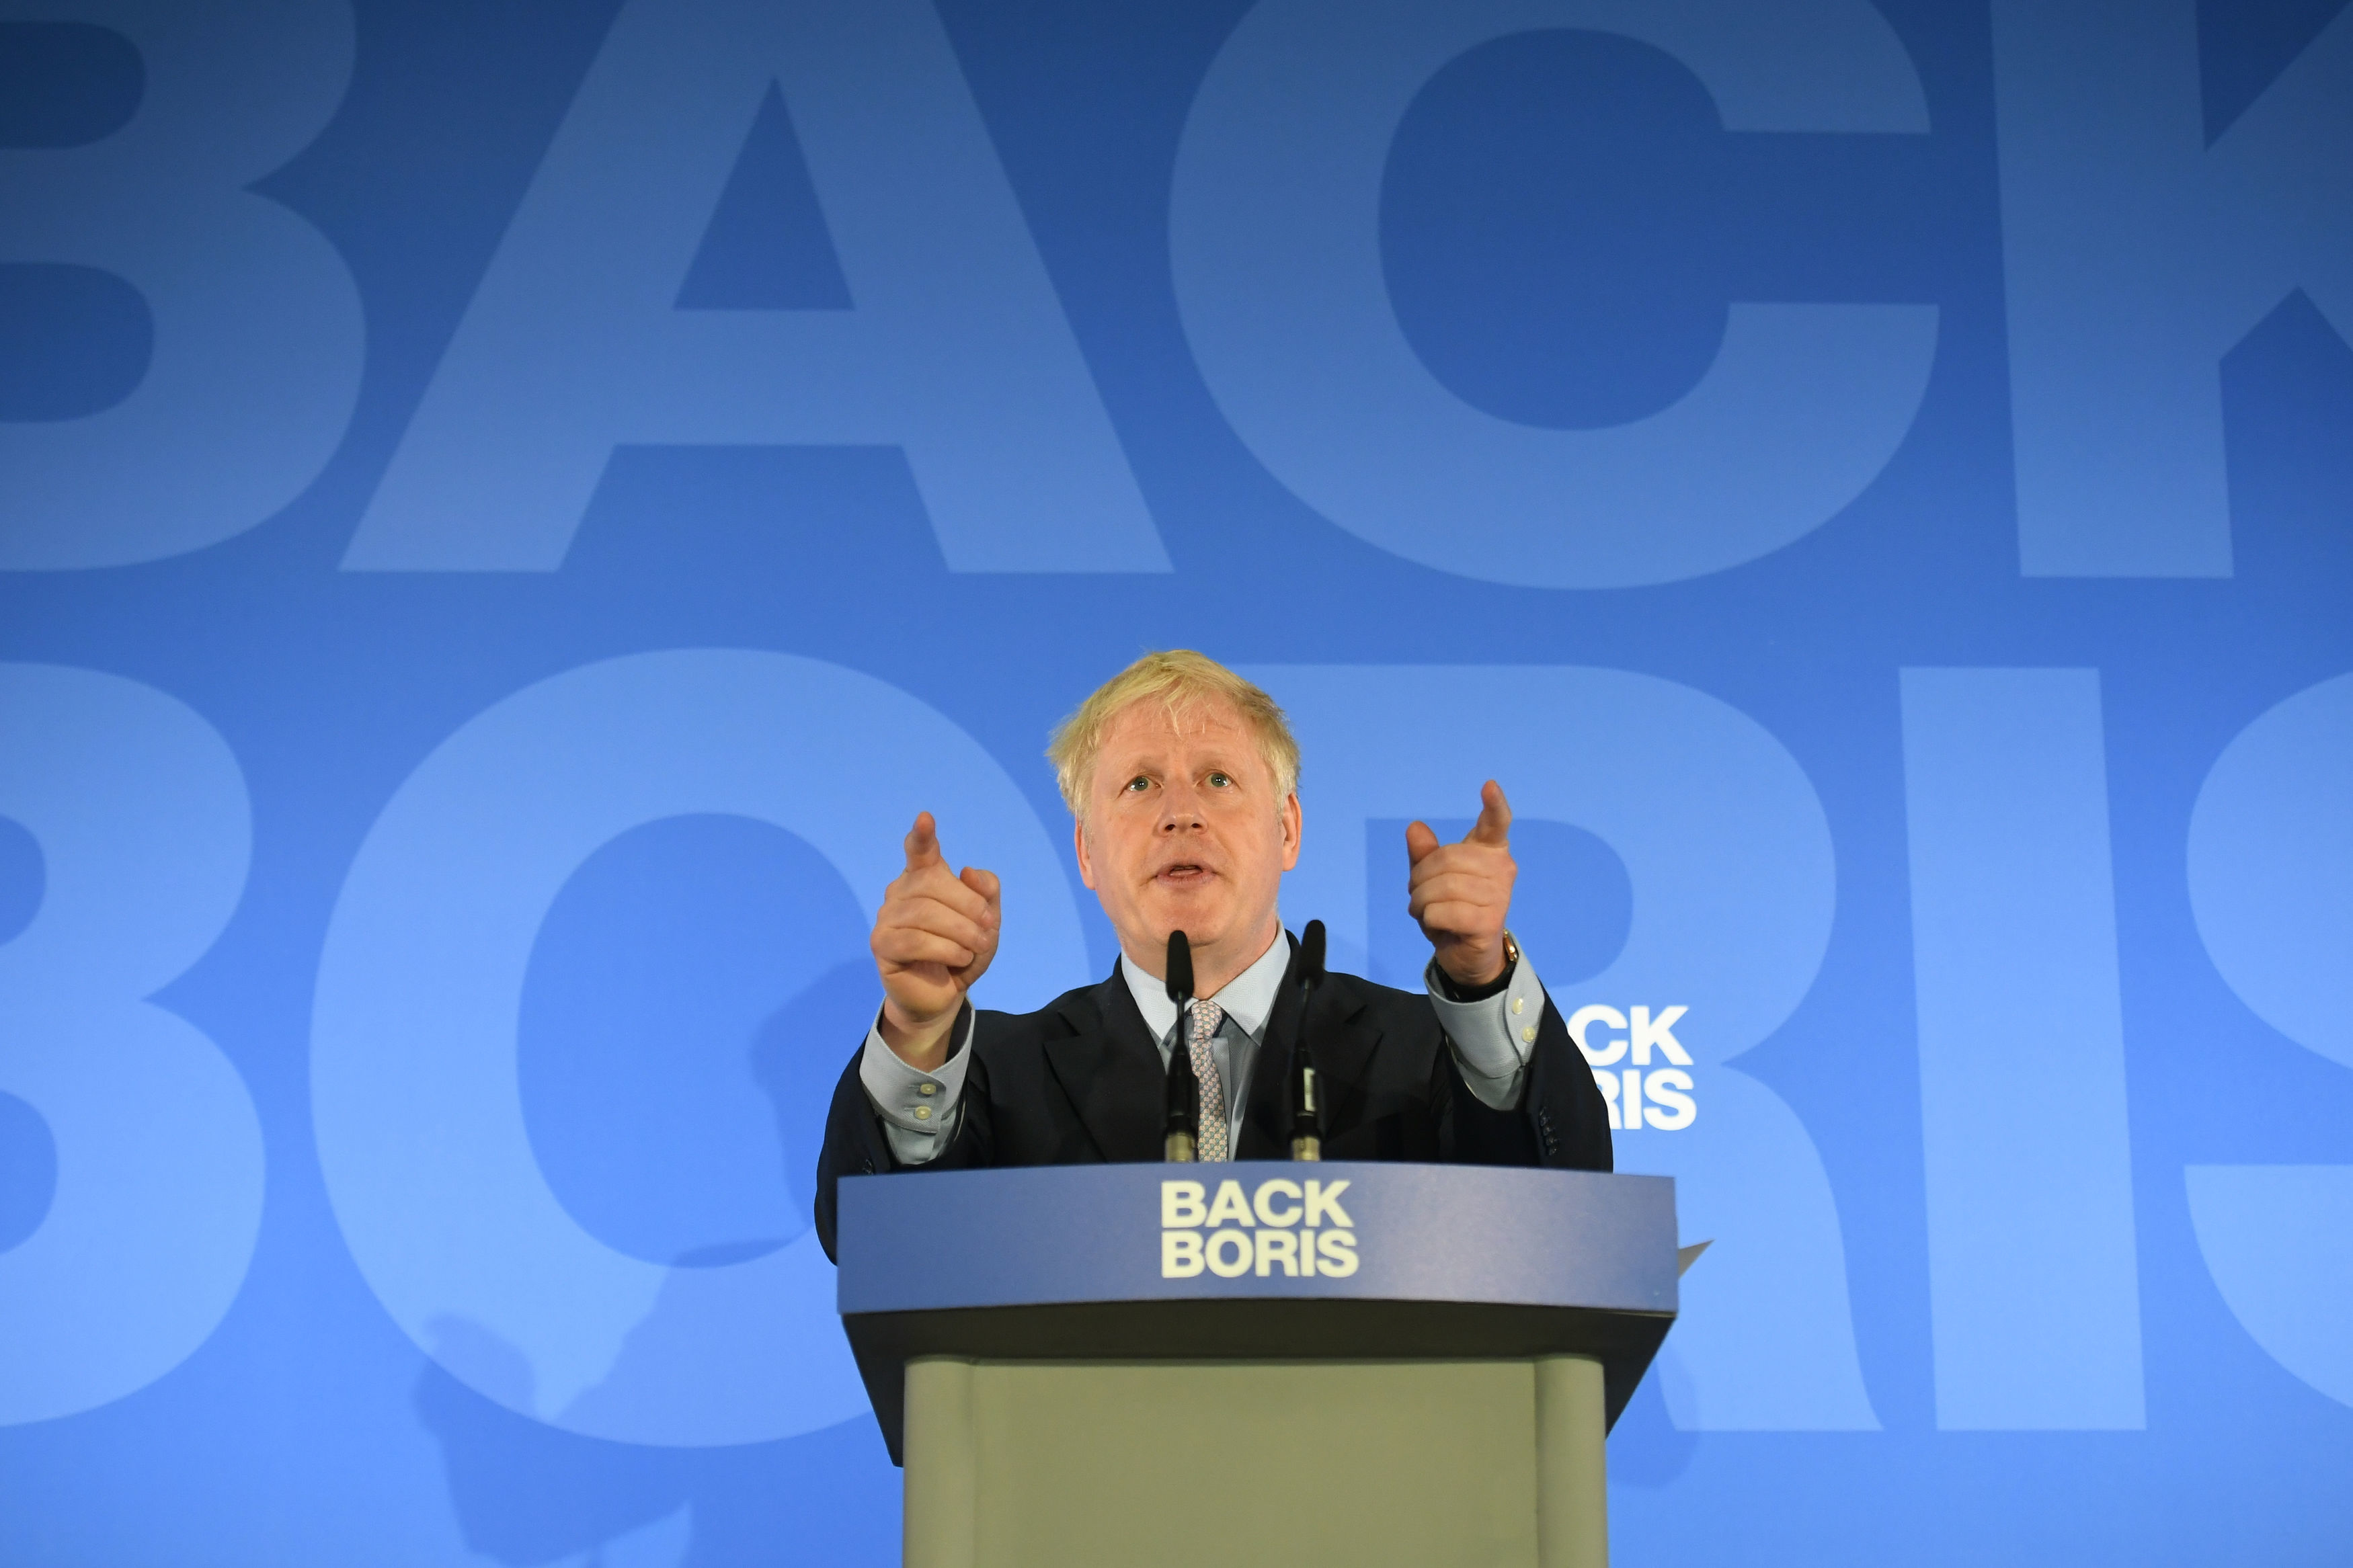 A born-again Boris is the Conservative Party's best hope 